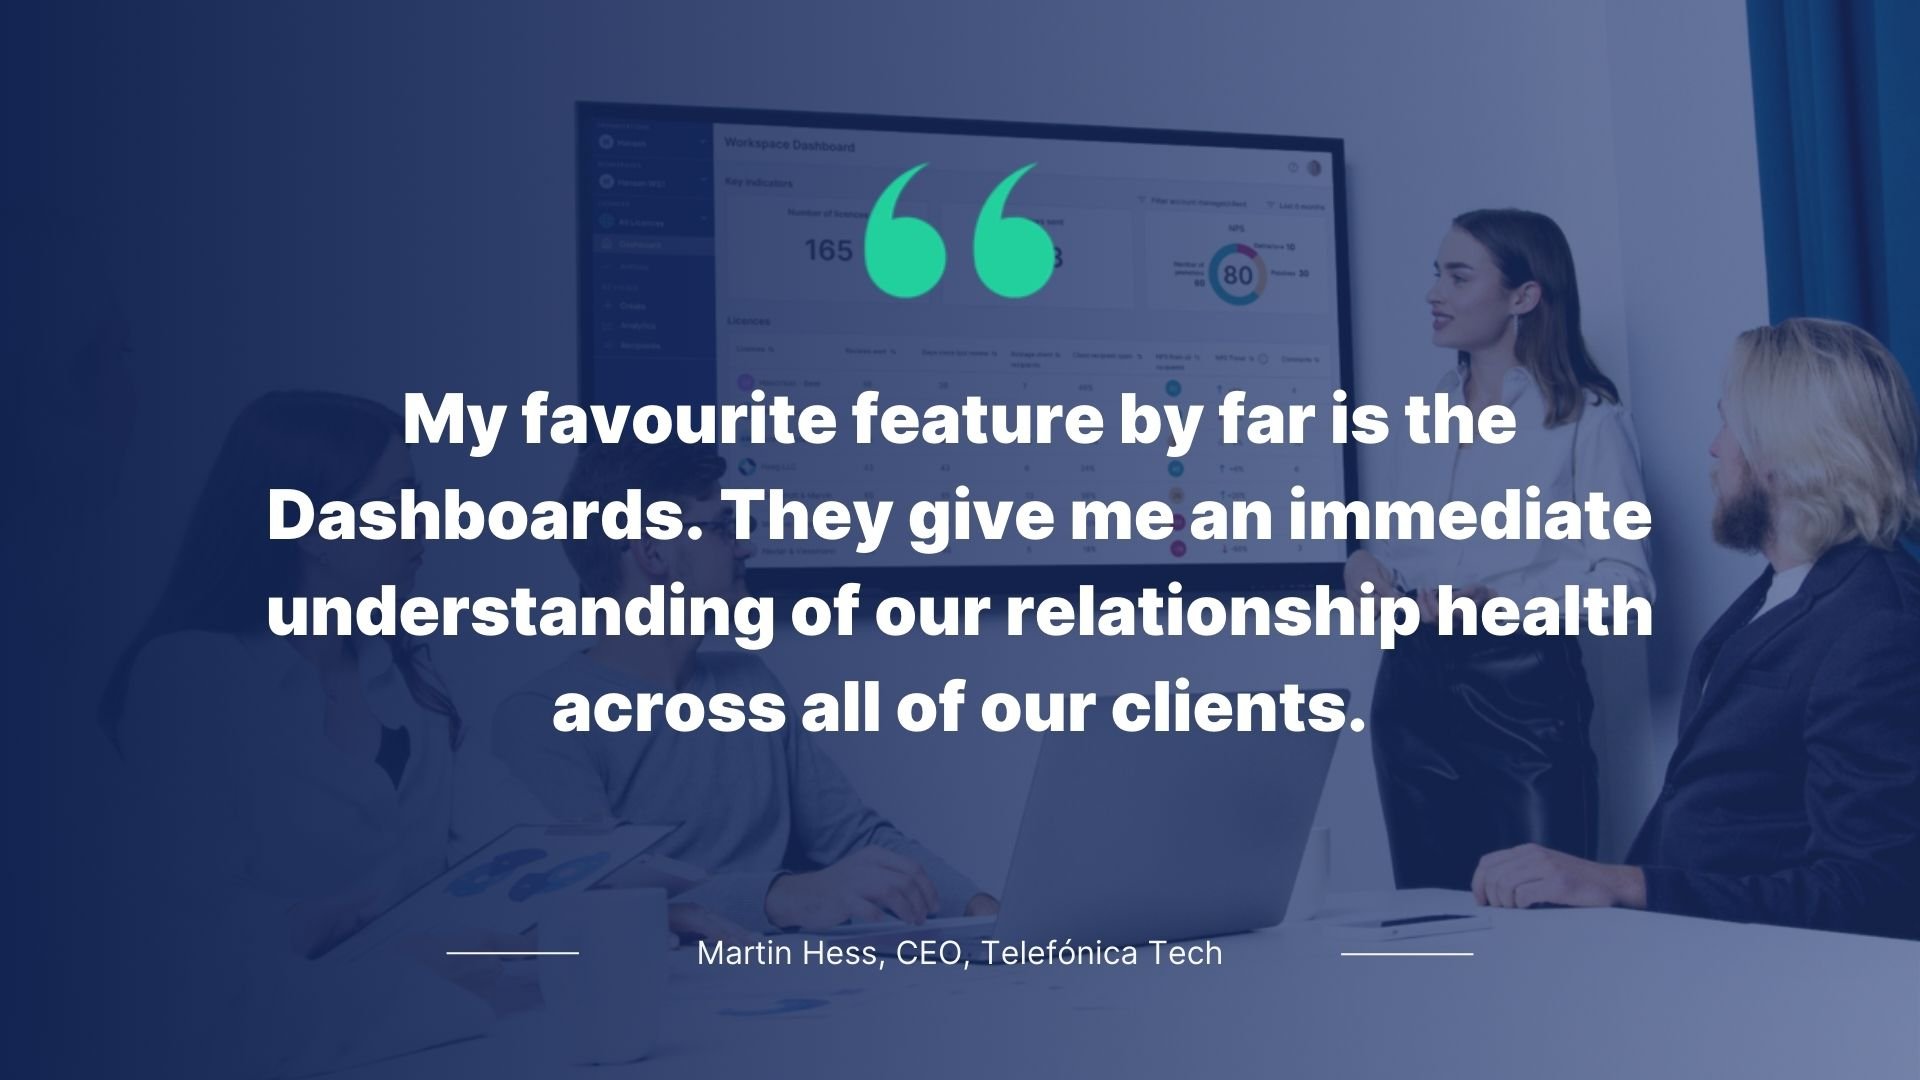 Quote by Martin Hess, CEO, Telefónica Tech: My favourite feature by far is the Dashboards. They give me an immediate understanding of our client relationship health across all of our clients.